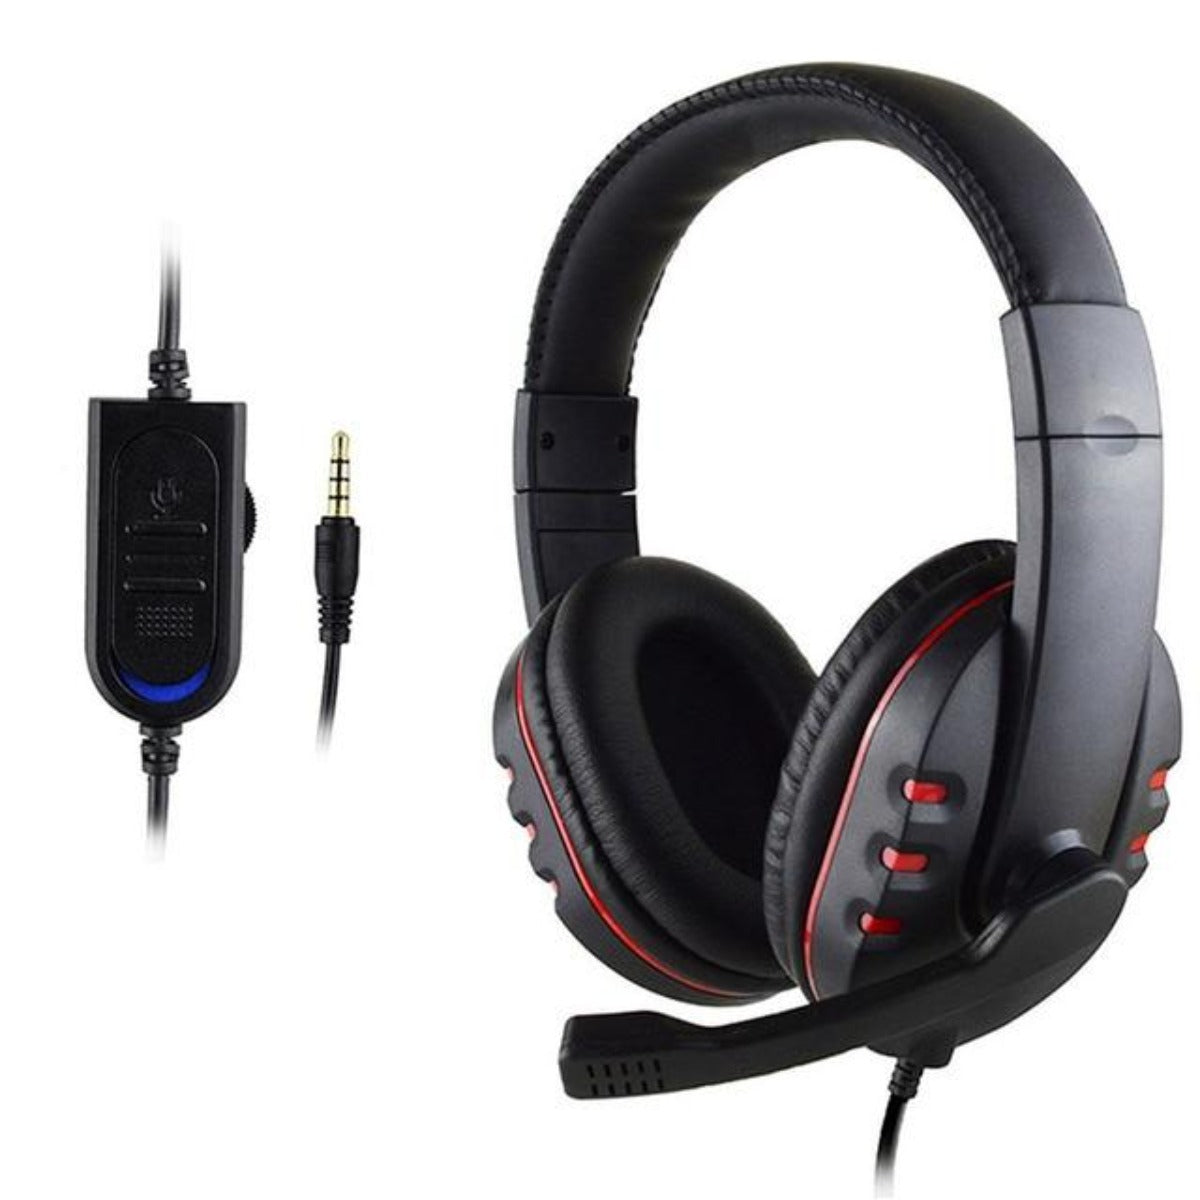 Dragon Space S3600 Wired Stereo Gaming Headset